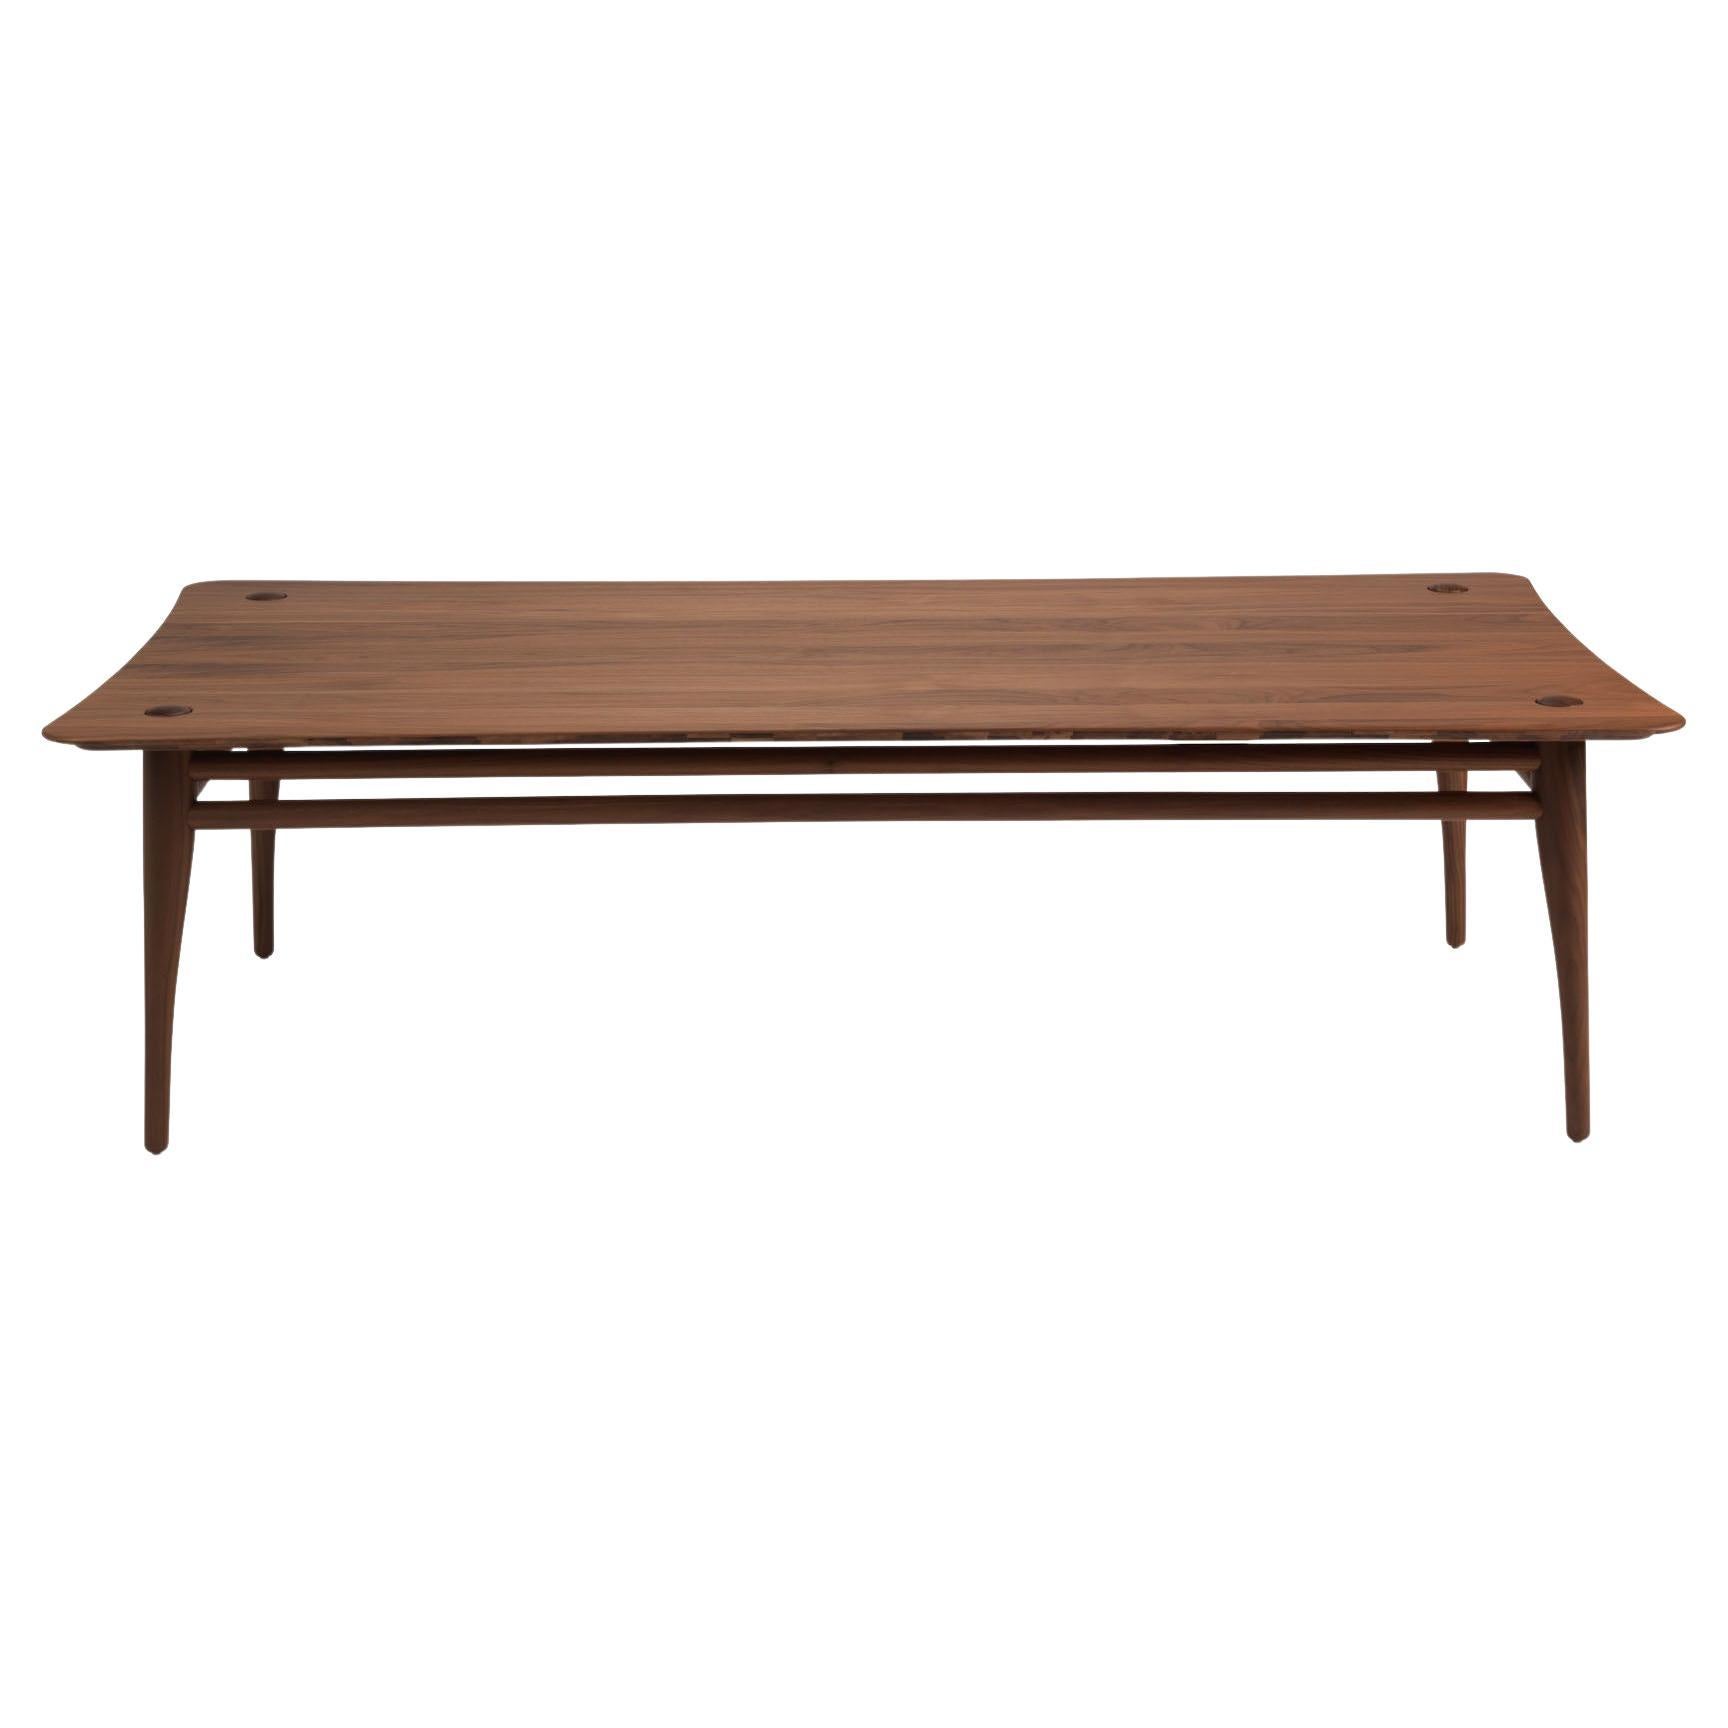 Revised Chilgrove - solid walnut coffee table - rectangle 120x60cm For Sale